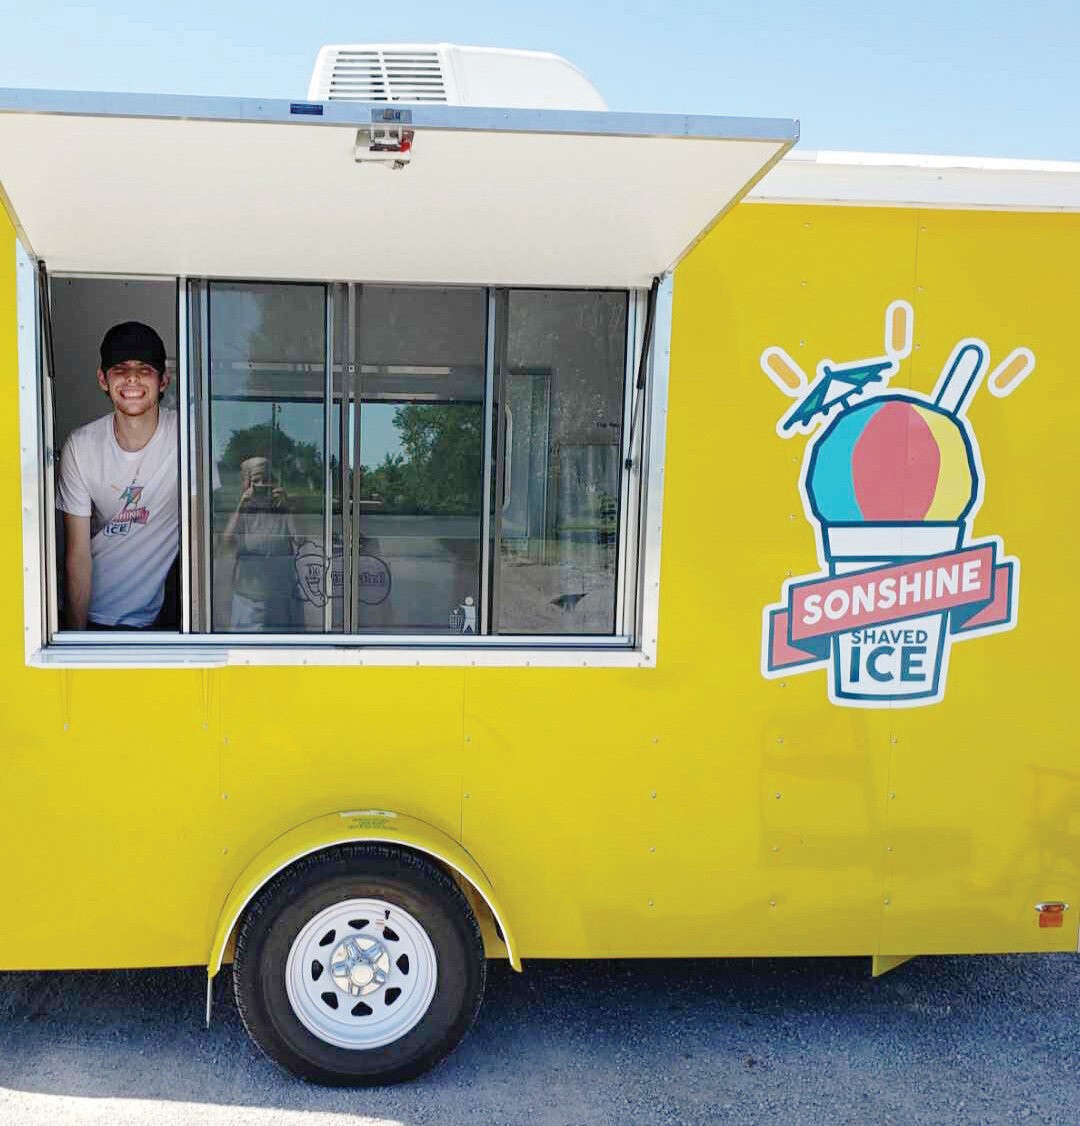 Zachary and his mother, Penny Jacobs, operate this shaved ice business in Wayne.